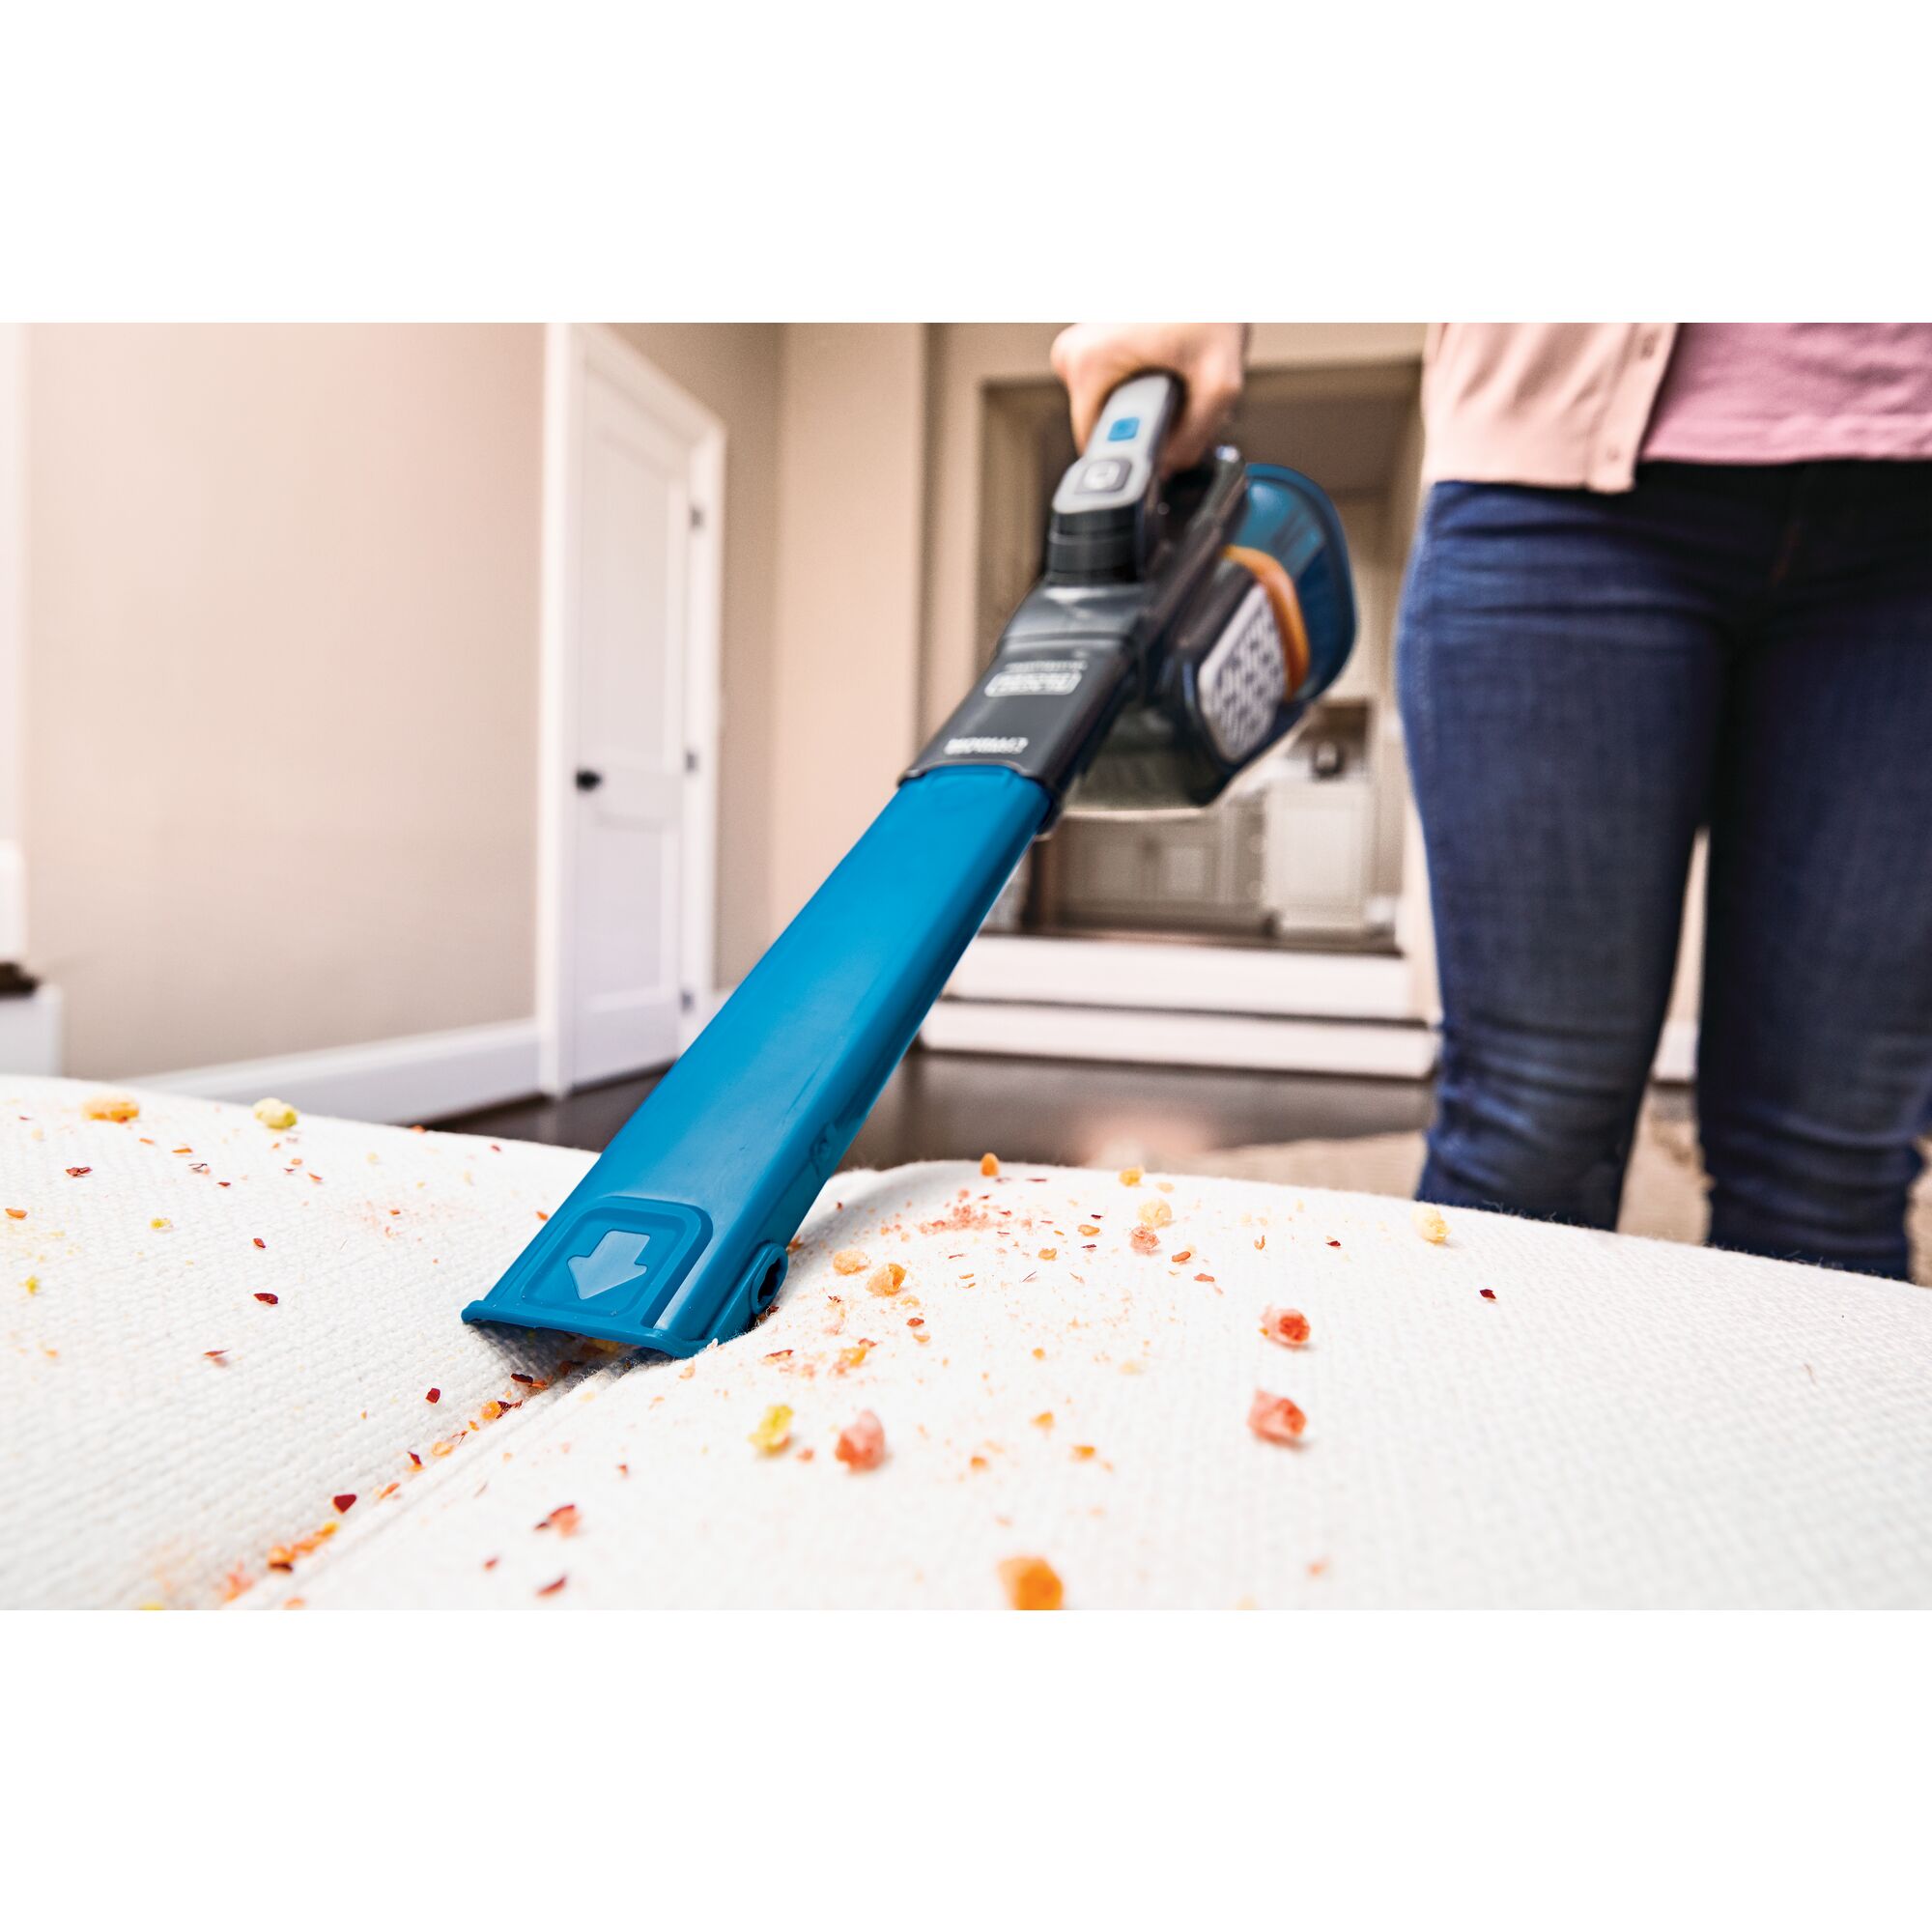 Dustbuster advanced clean plus cordless hand vacuum cleaning sofa.